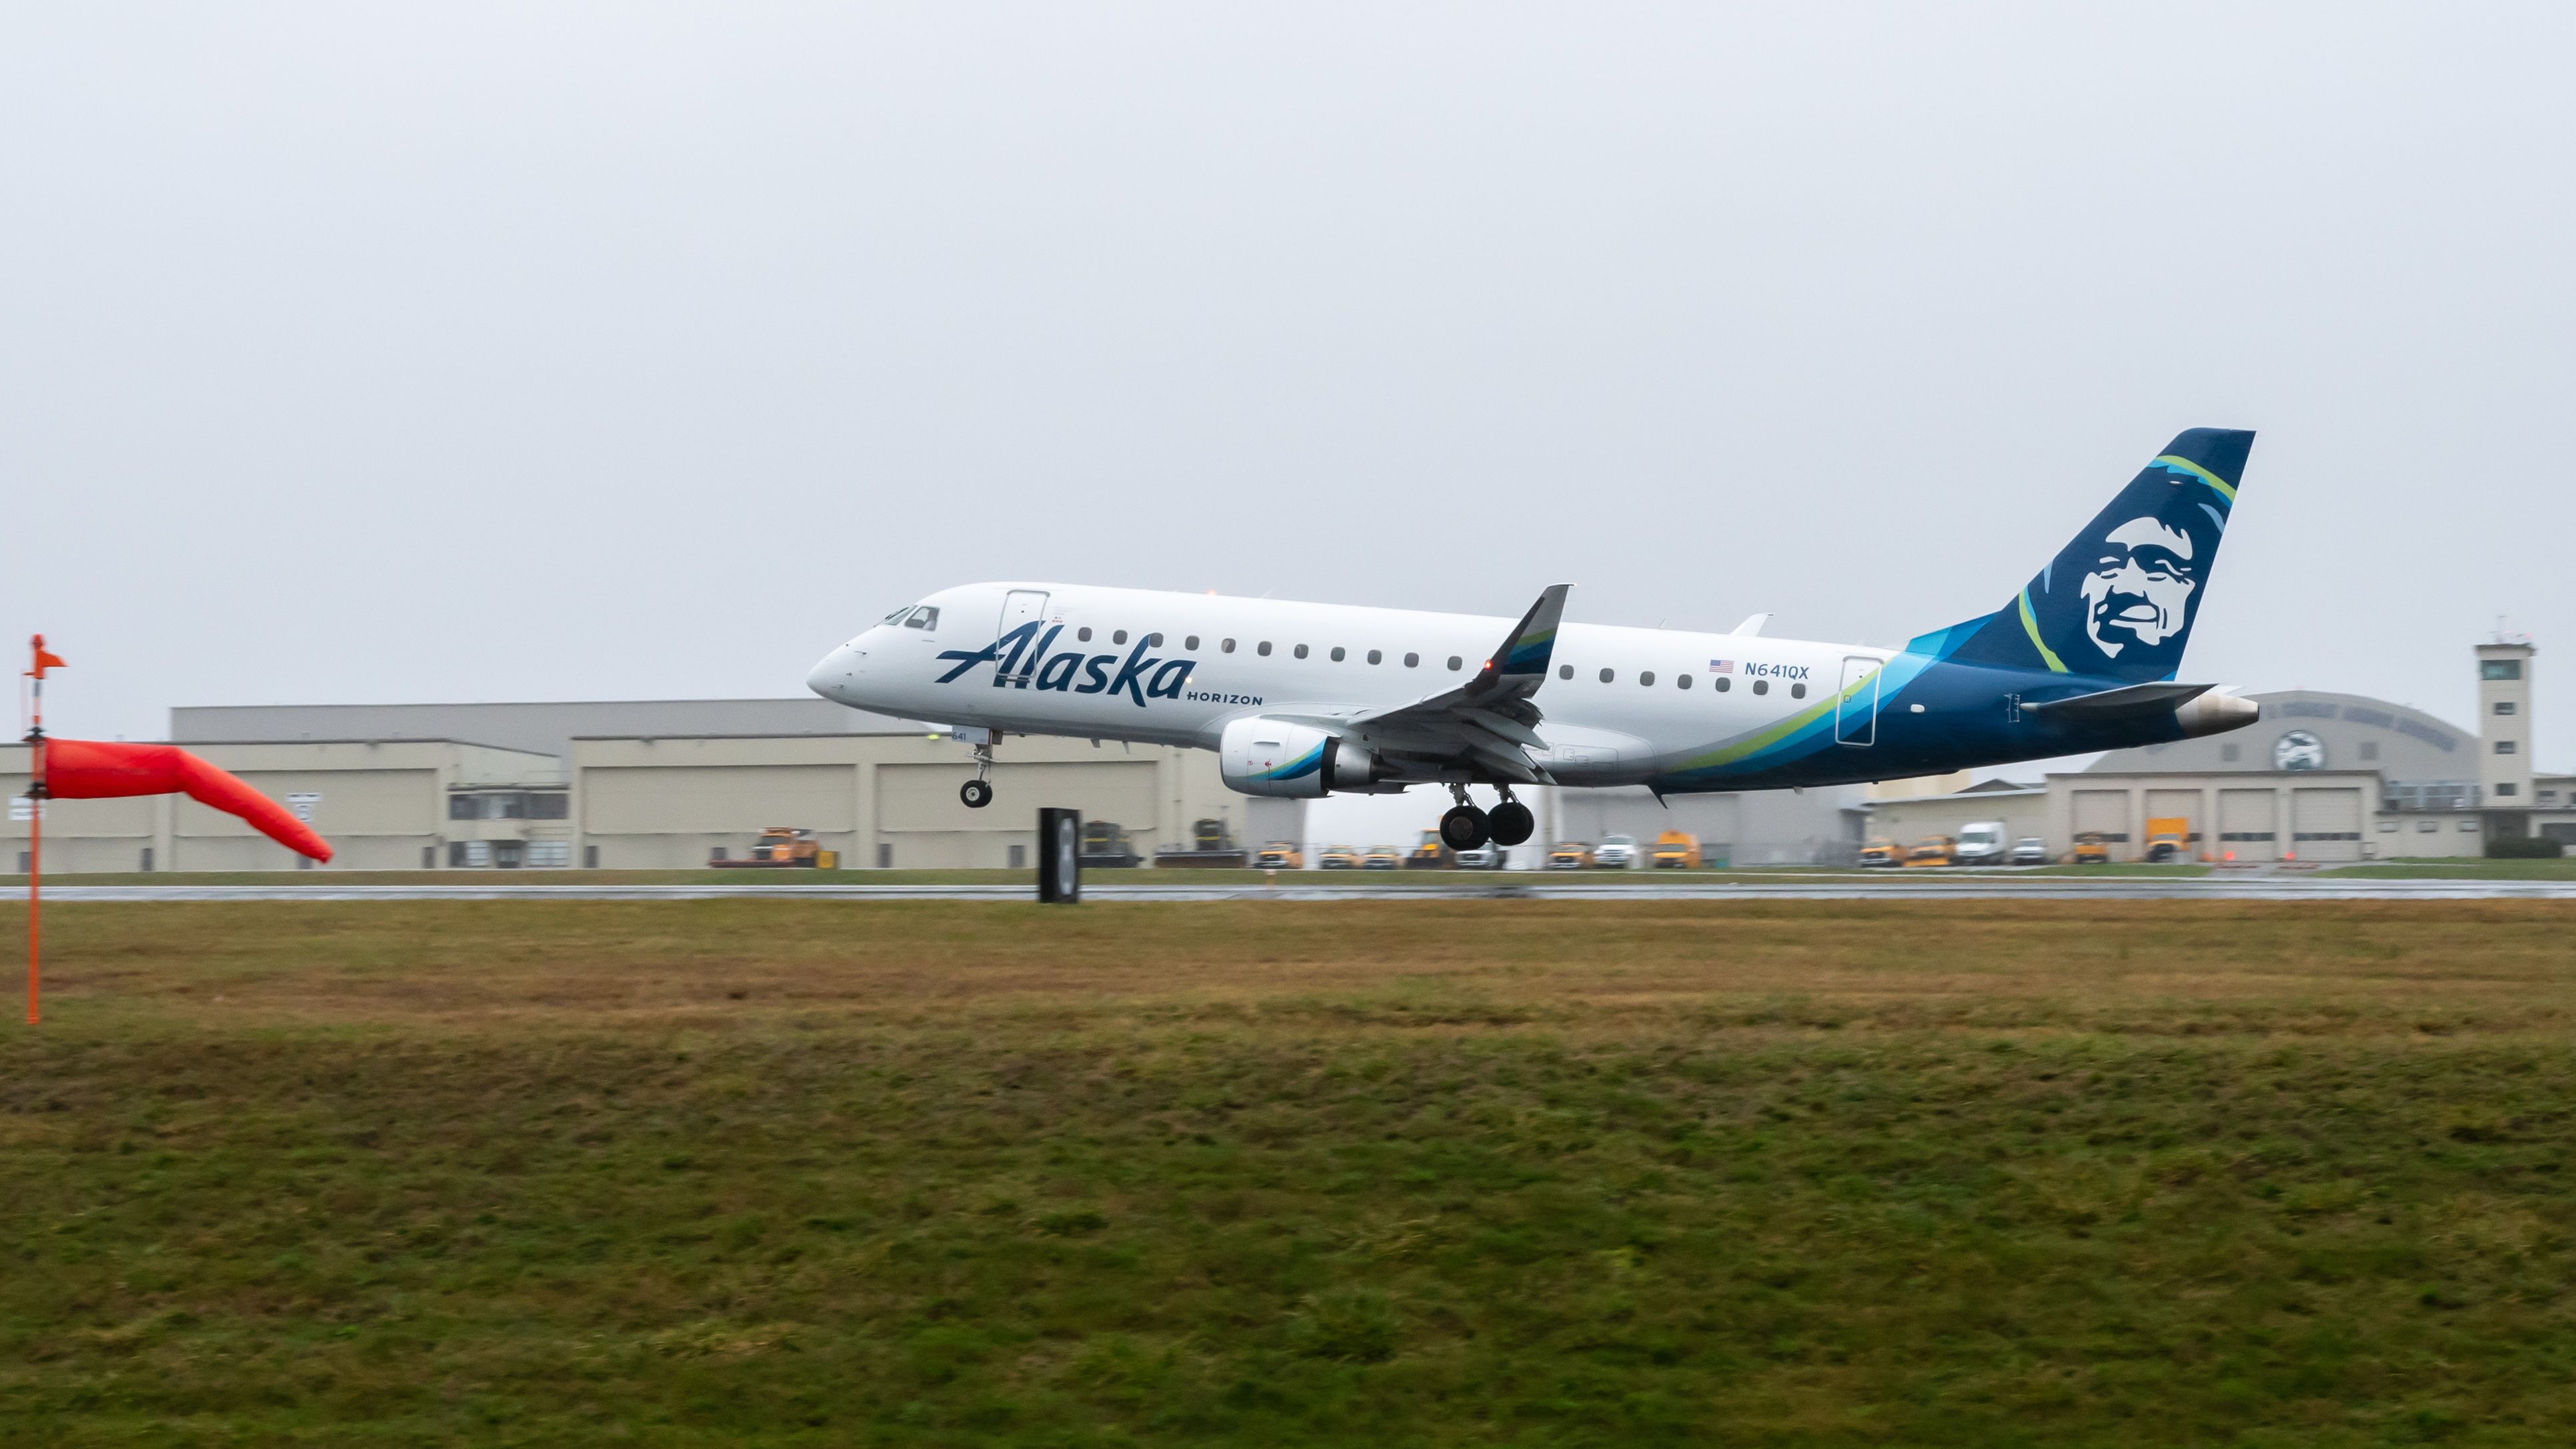 A Horizon E175 About to Land in the Damp at Paine Field